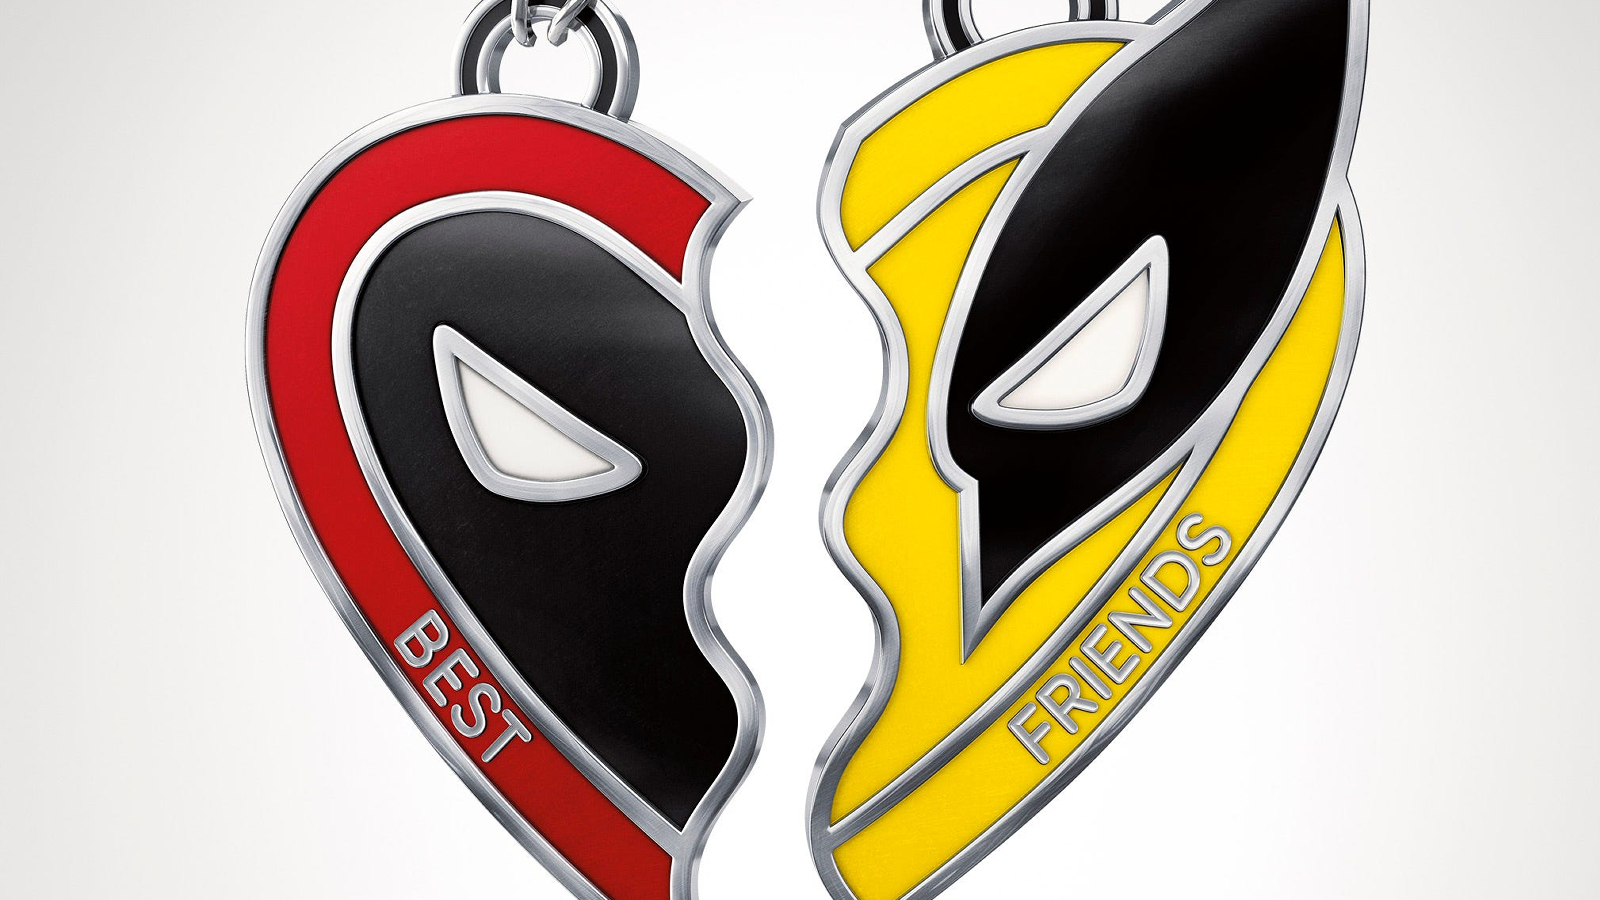 A Deadpool and Wolverine-themed friendship necklace in cropped Deadpool & Wolverine key art